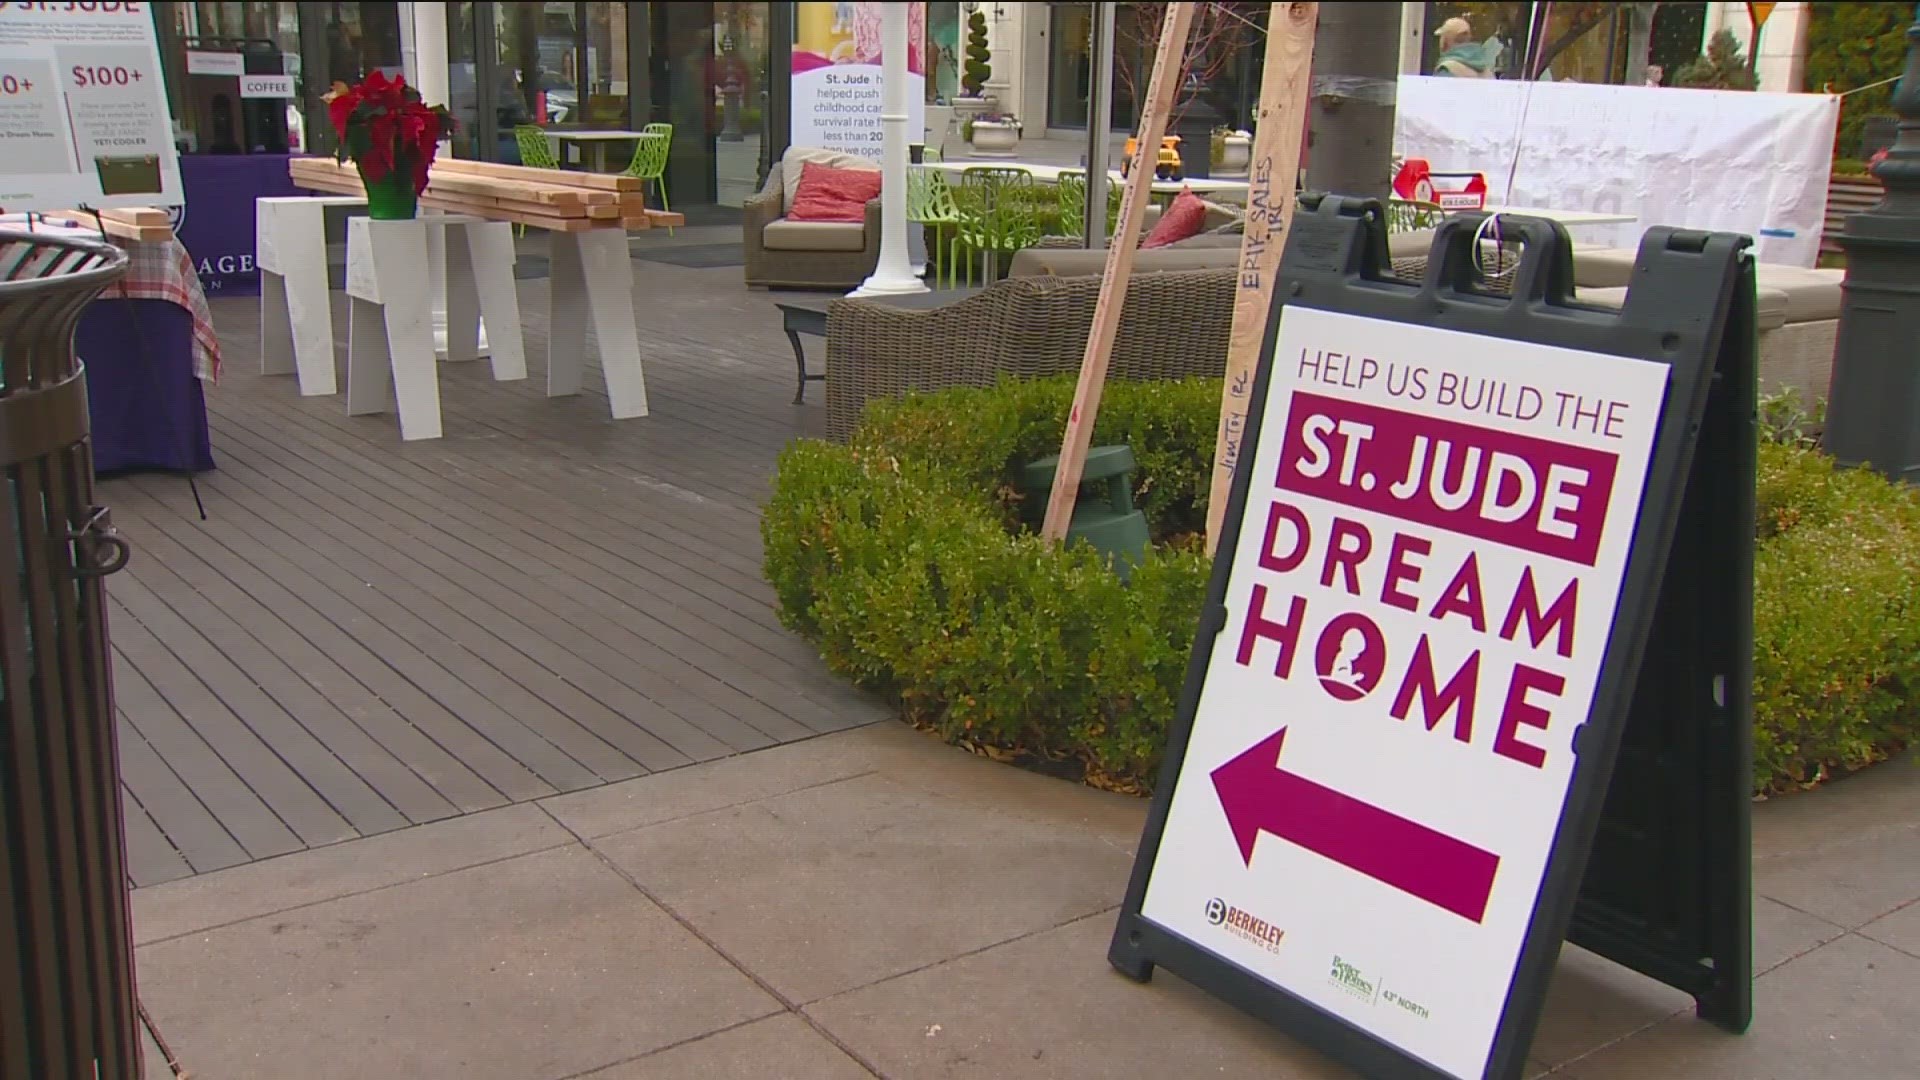 Each year, St. Jude and Berkley Building Company team up with this home giveaway in an effort to fight childhood cancer. Tickets go on sale April 26 at 5 a.m. MT.